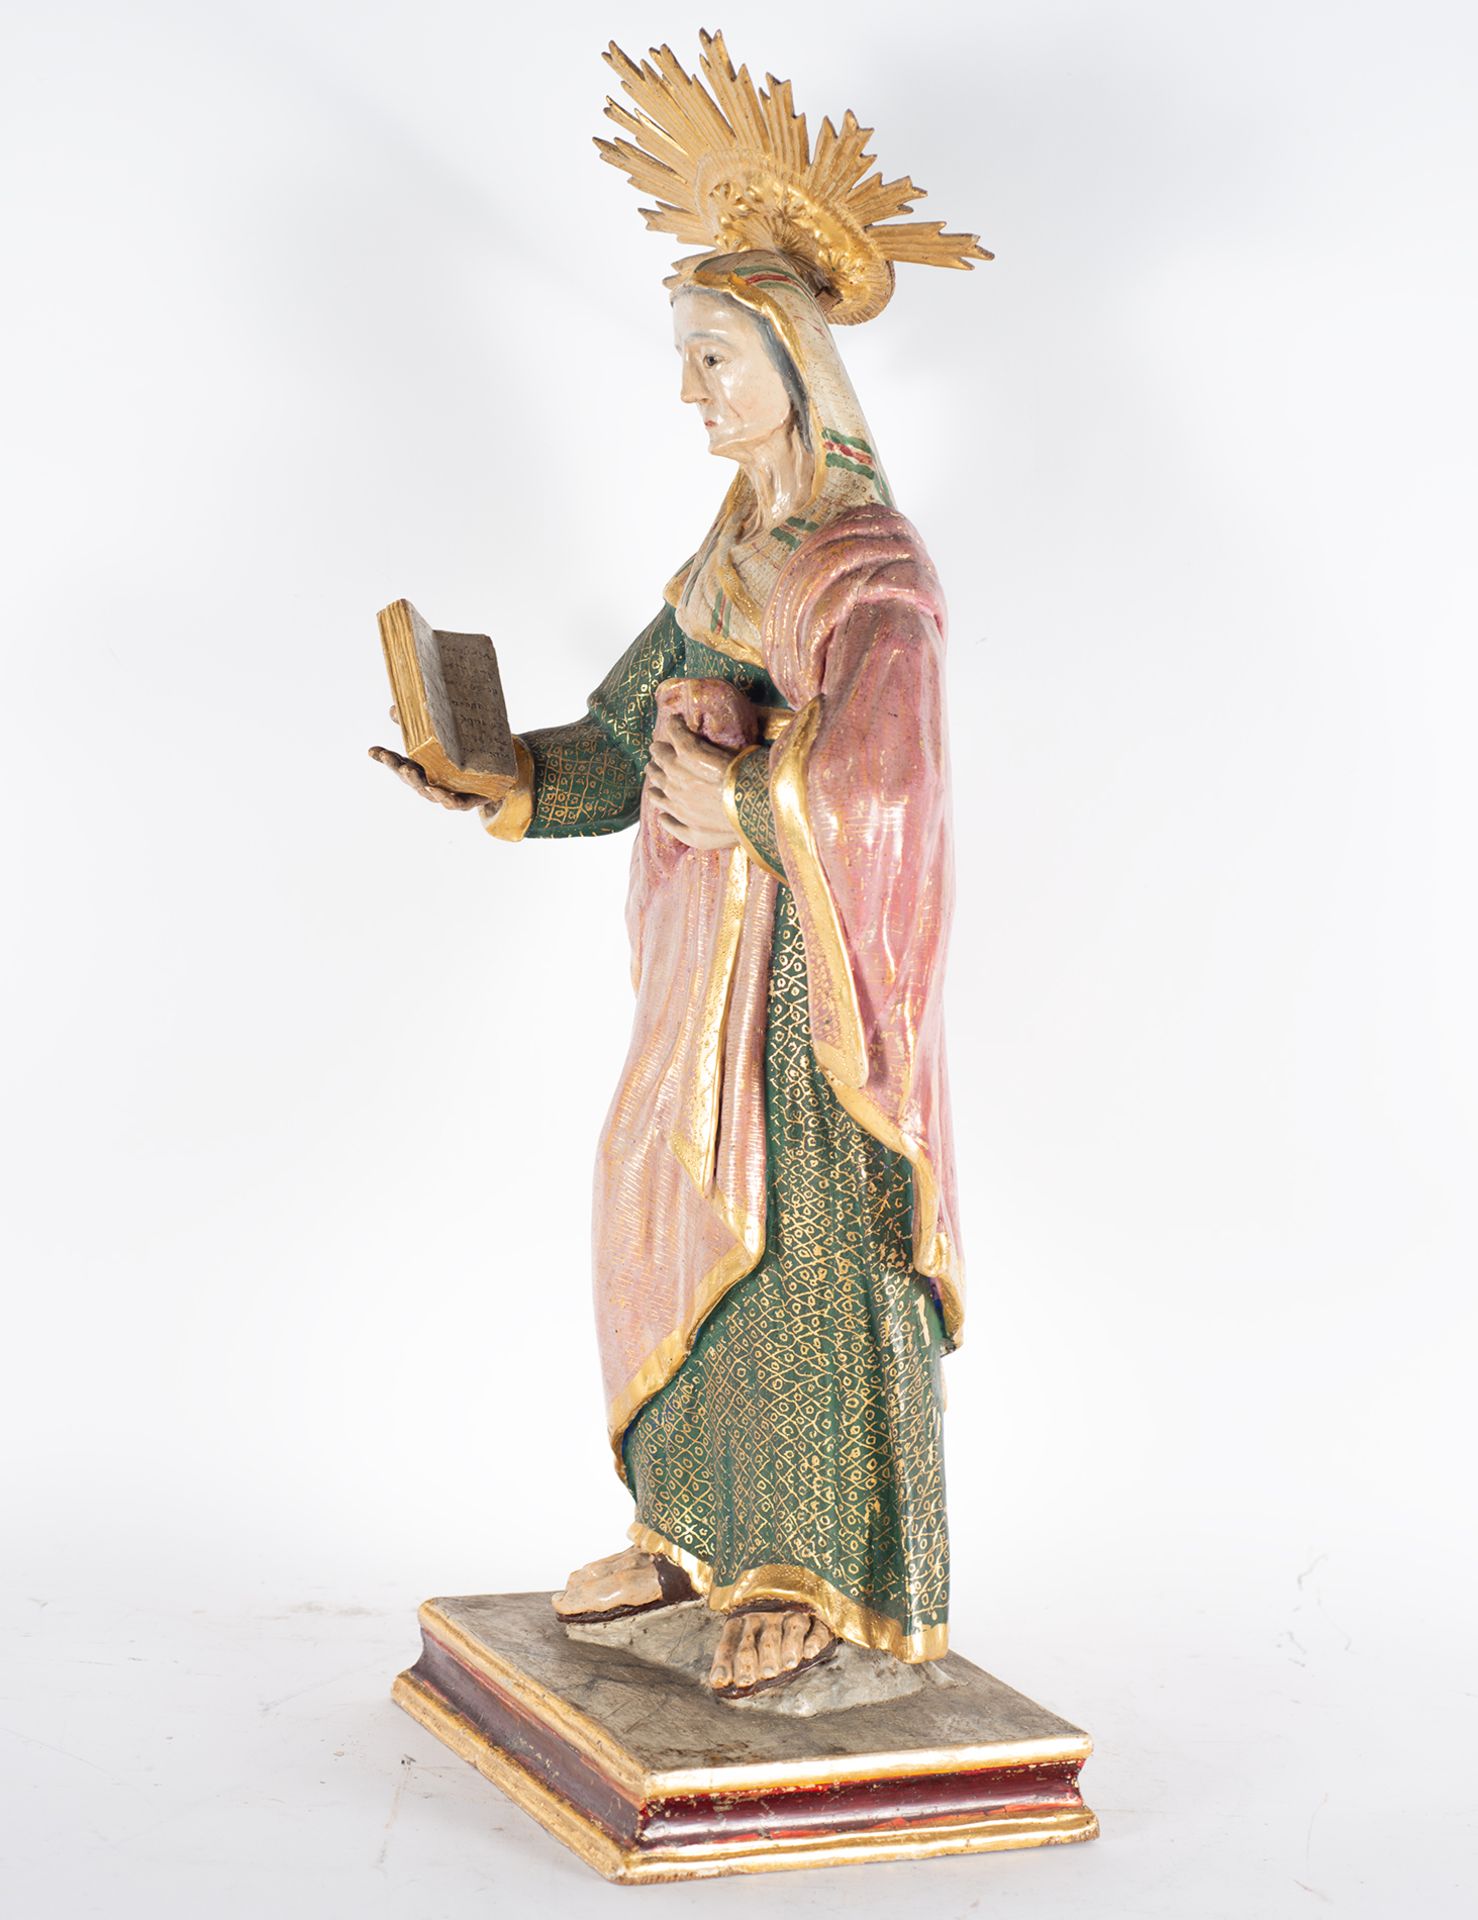 Carving of Santa Ana in wood, Spain, 18th century - Image 2 of 5